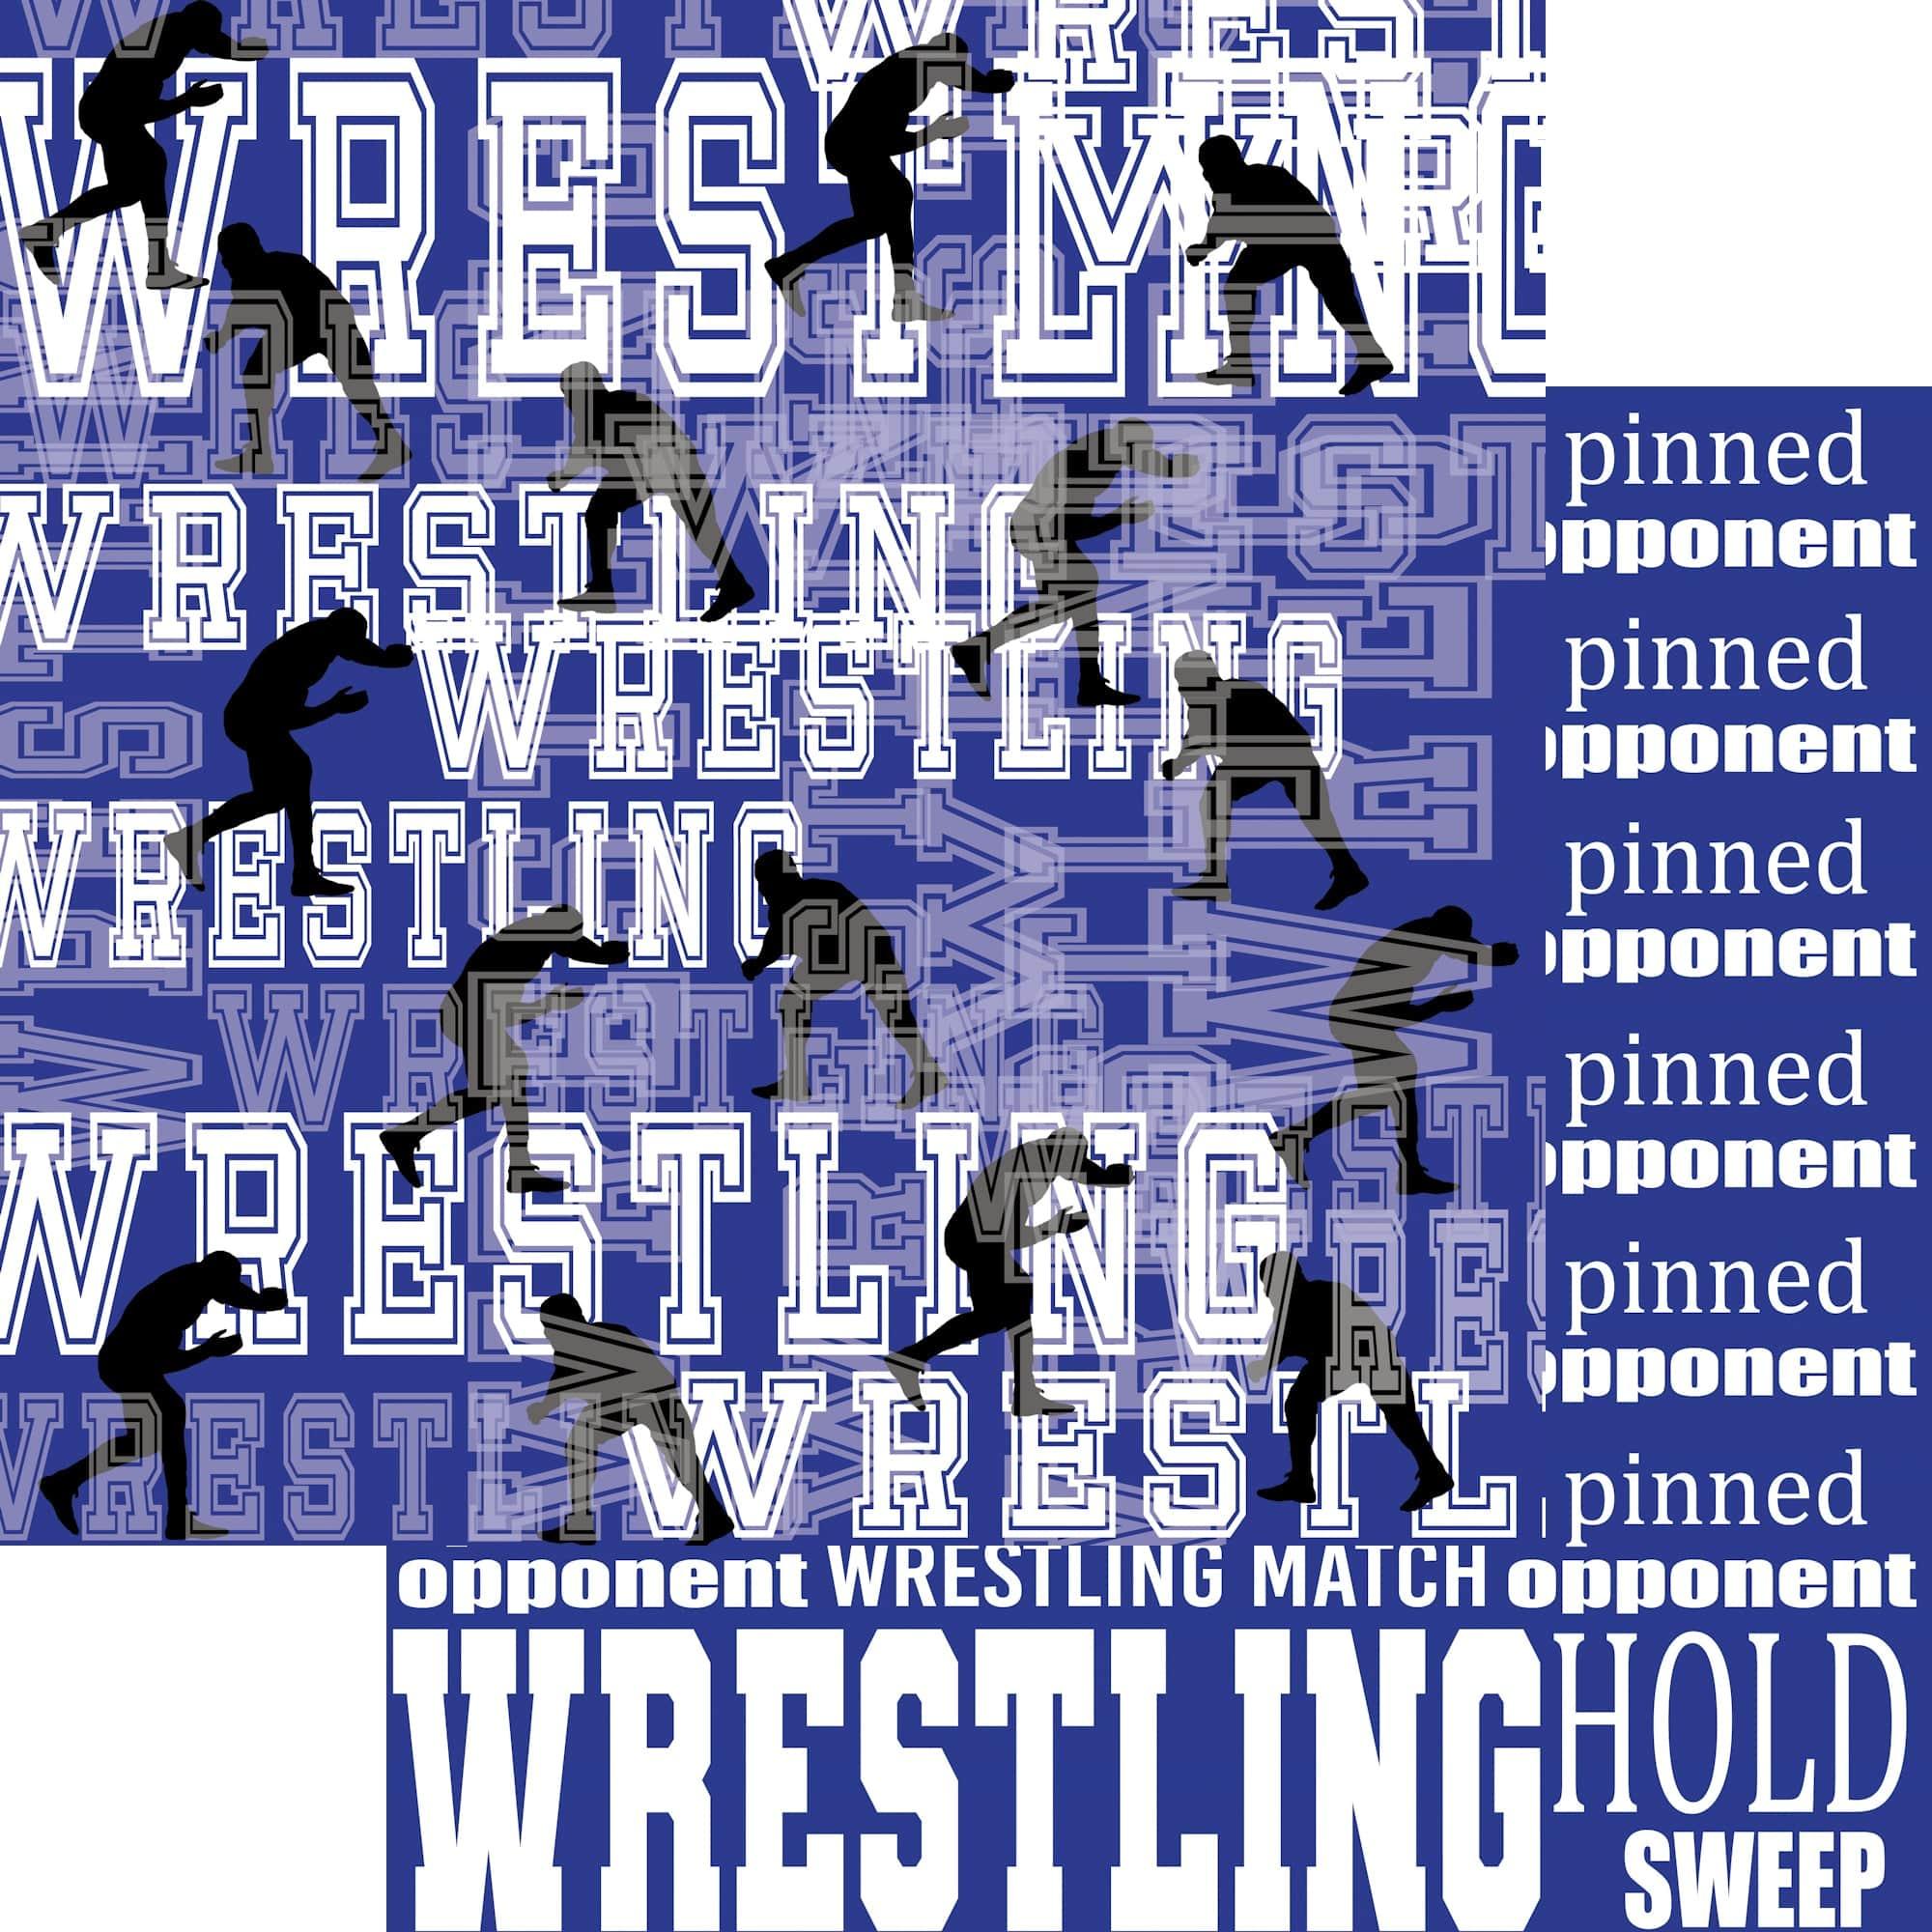 Male Wrestling Collection Wrestling Collage 12 x 12 Double-Sided Scrapbook Paper by SSC Designs - Scrapbook Supply Companies